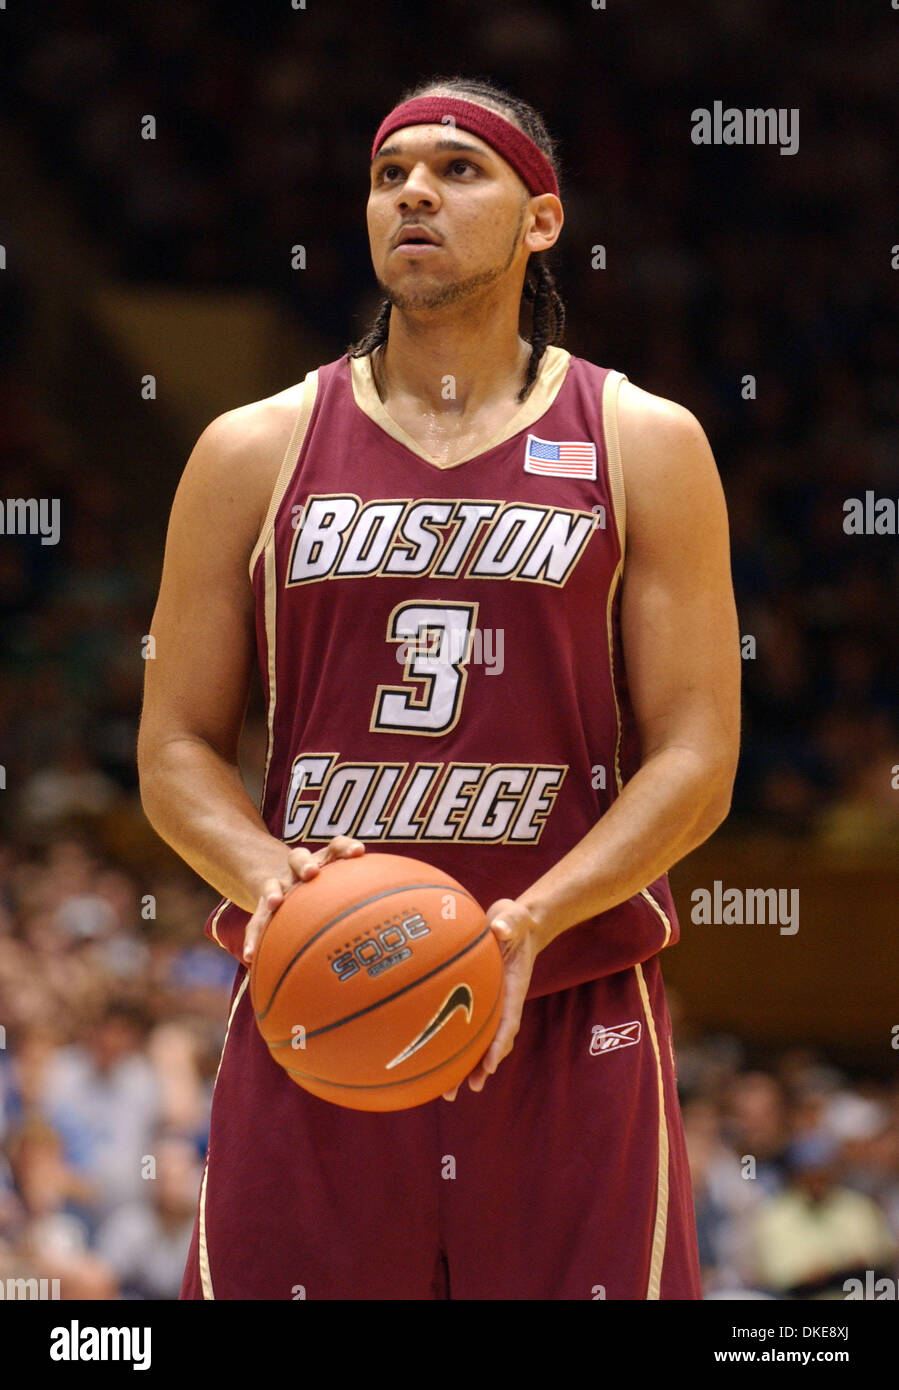 Jared Dudley: From Chestnut Hill to Champion - WZBC Sports